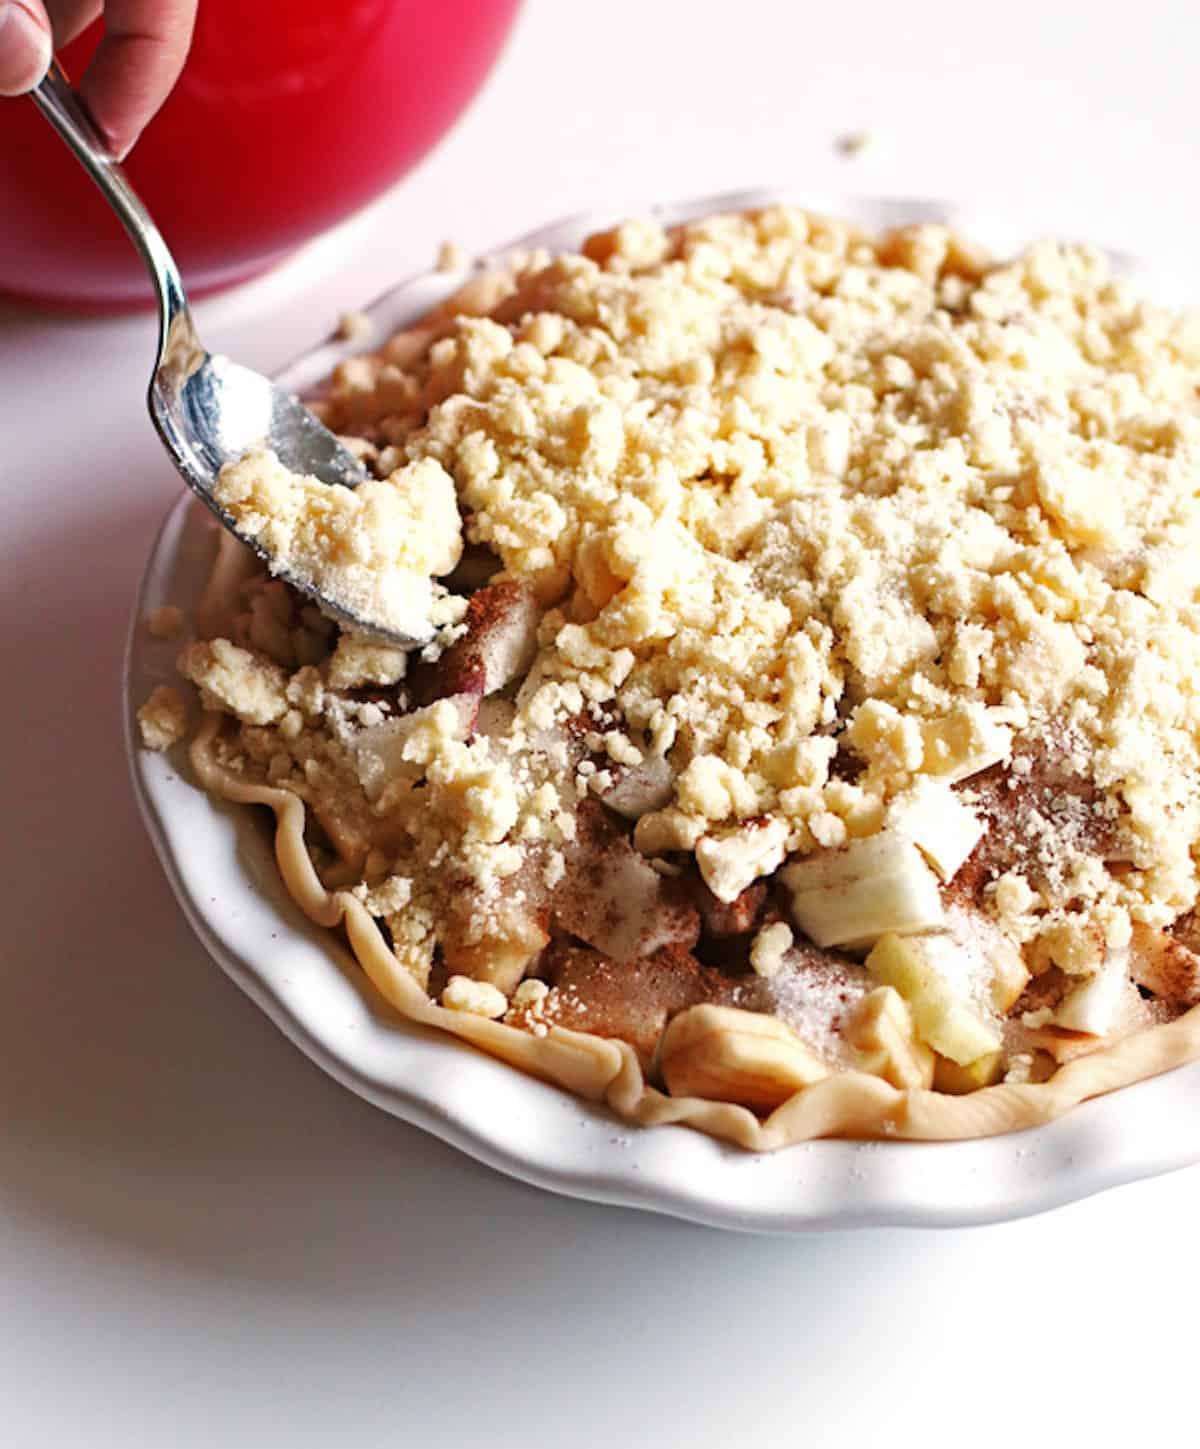 Adding crumb topping to top of the pie using a spoon